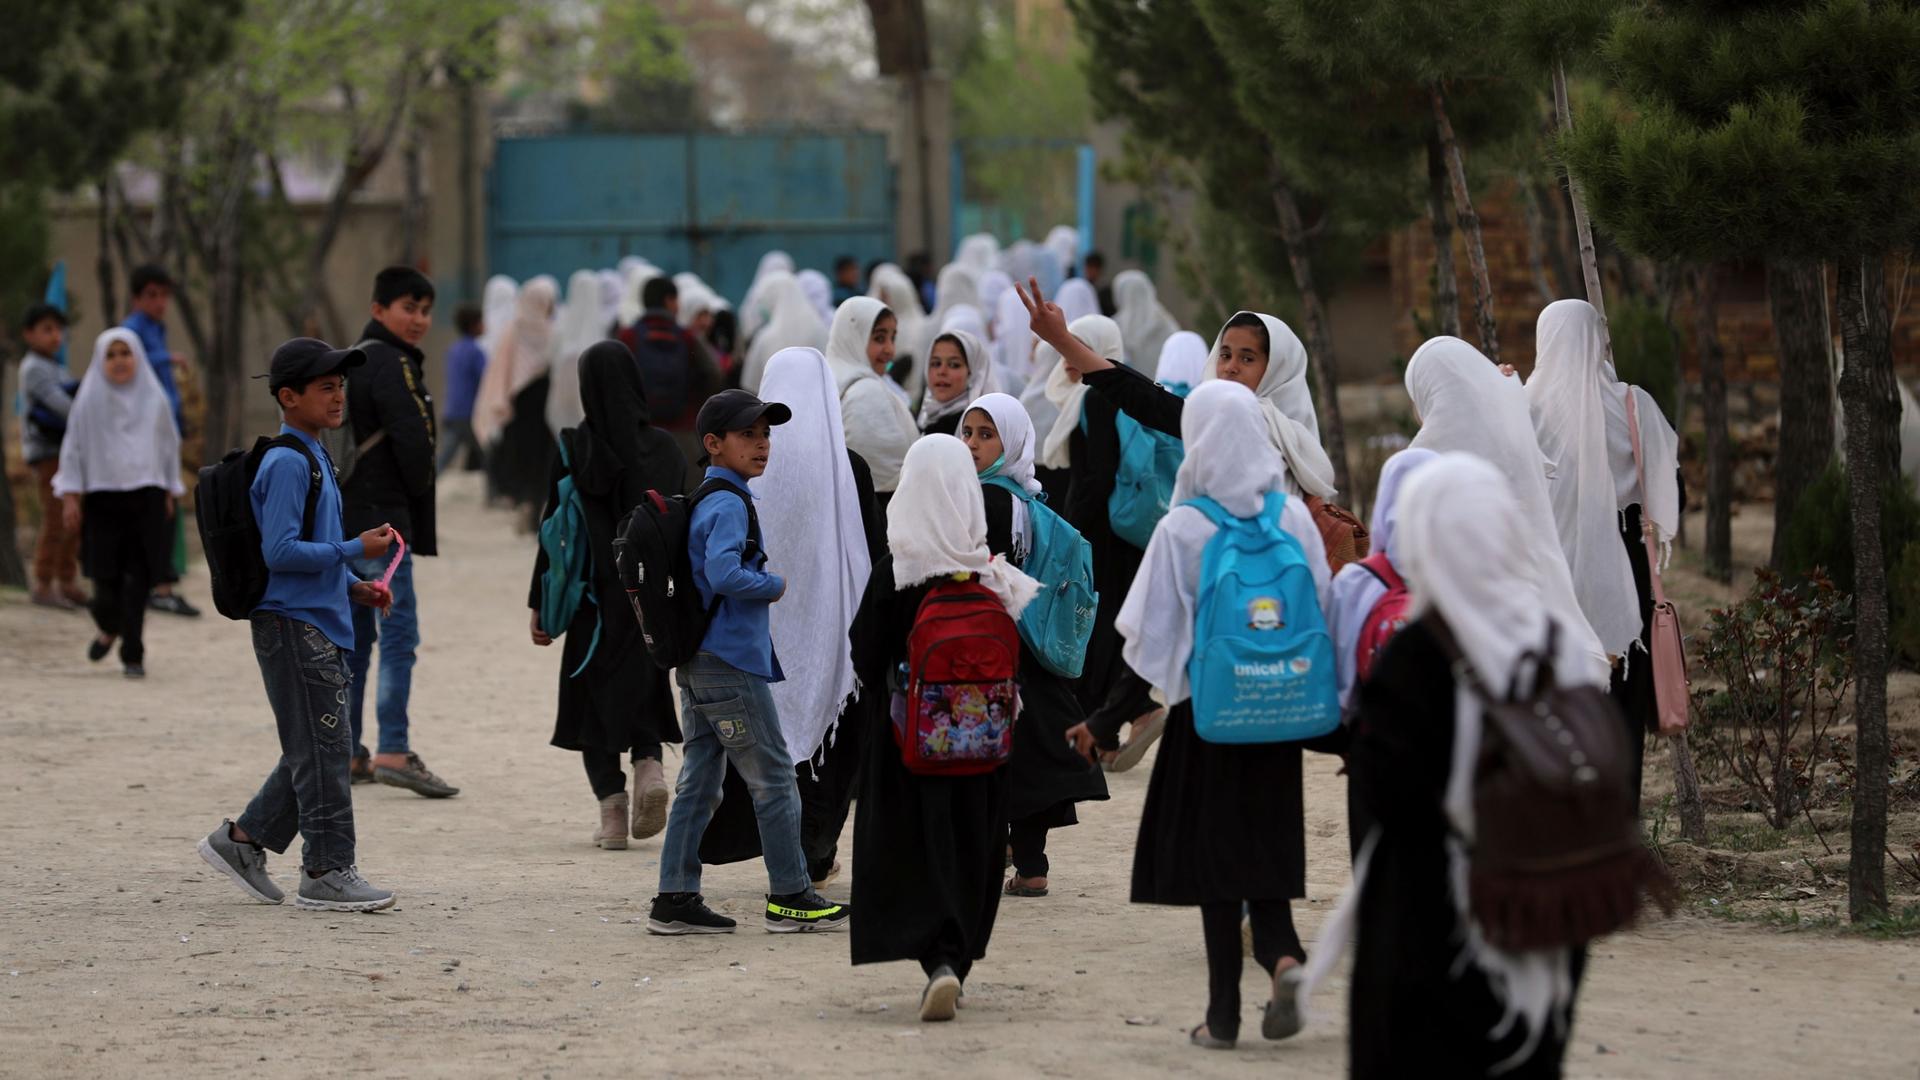 A crowd of young people are shown walking near a school with many girls wearing a white head covering.